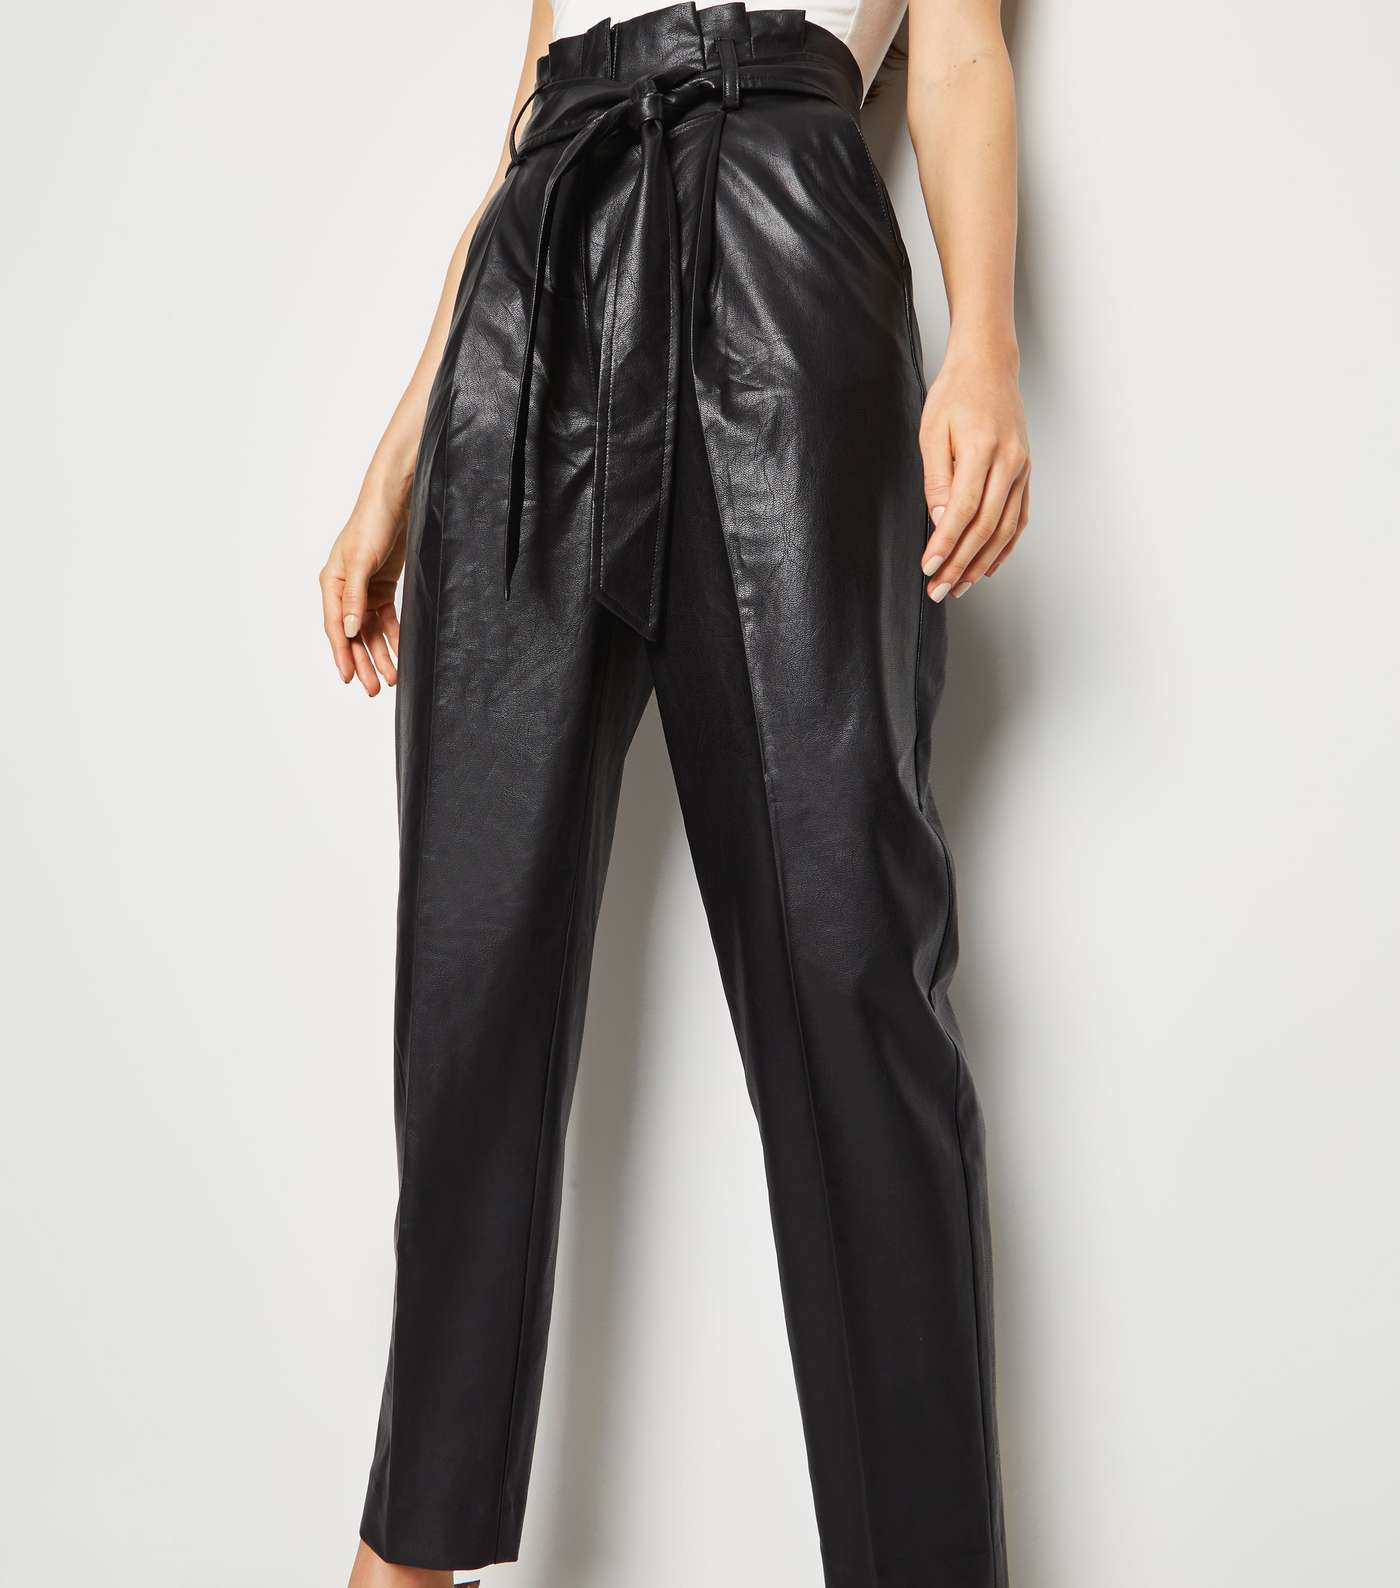 Black Leather-Look Tie High Waist Trousers Image 5